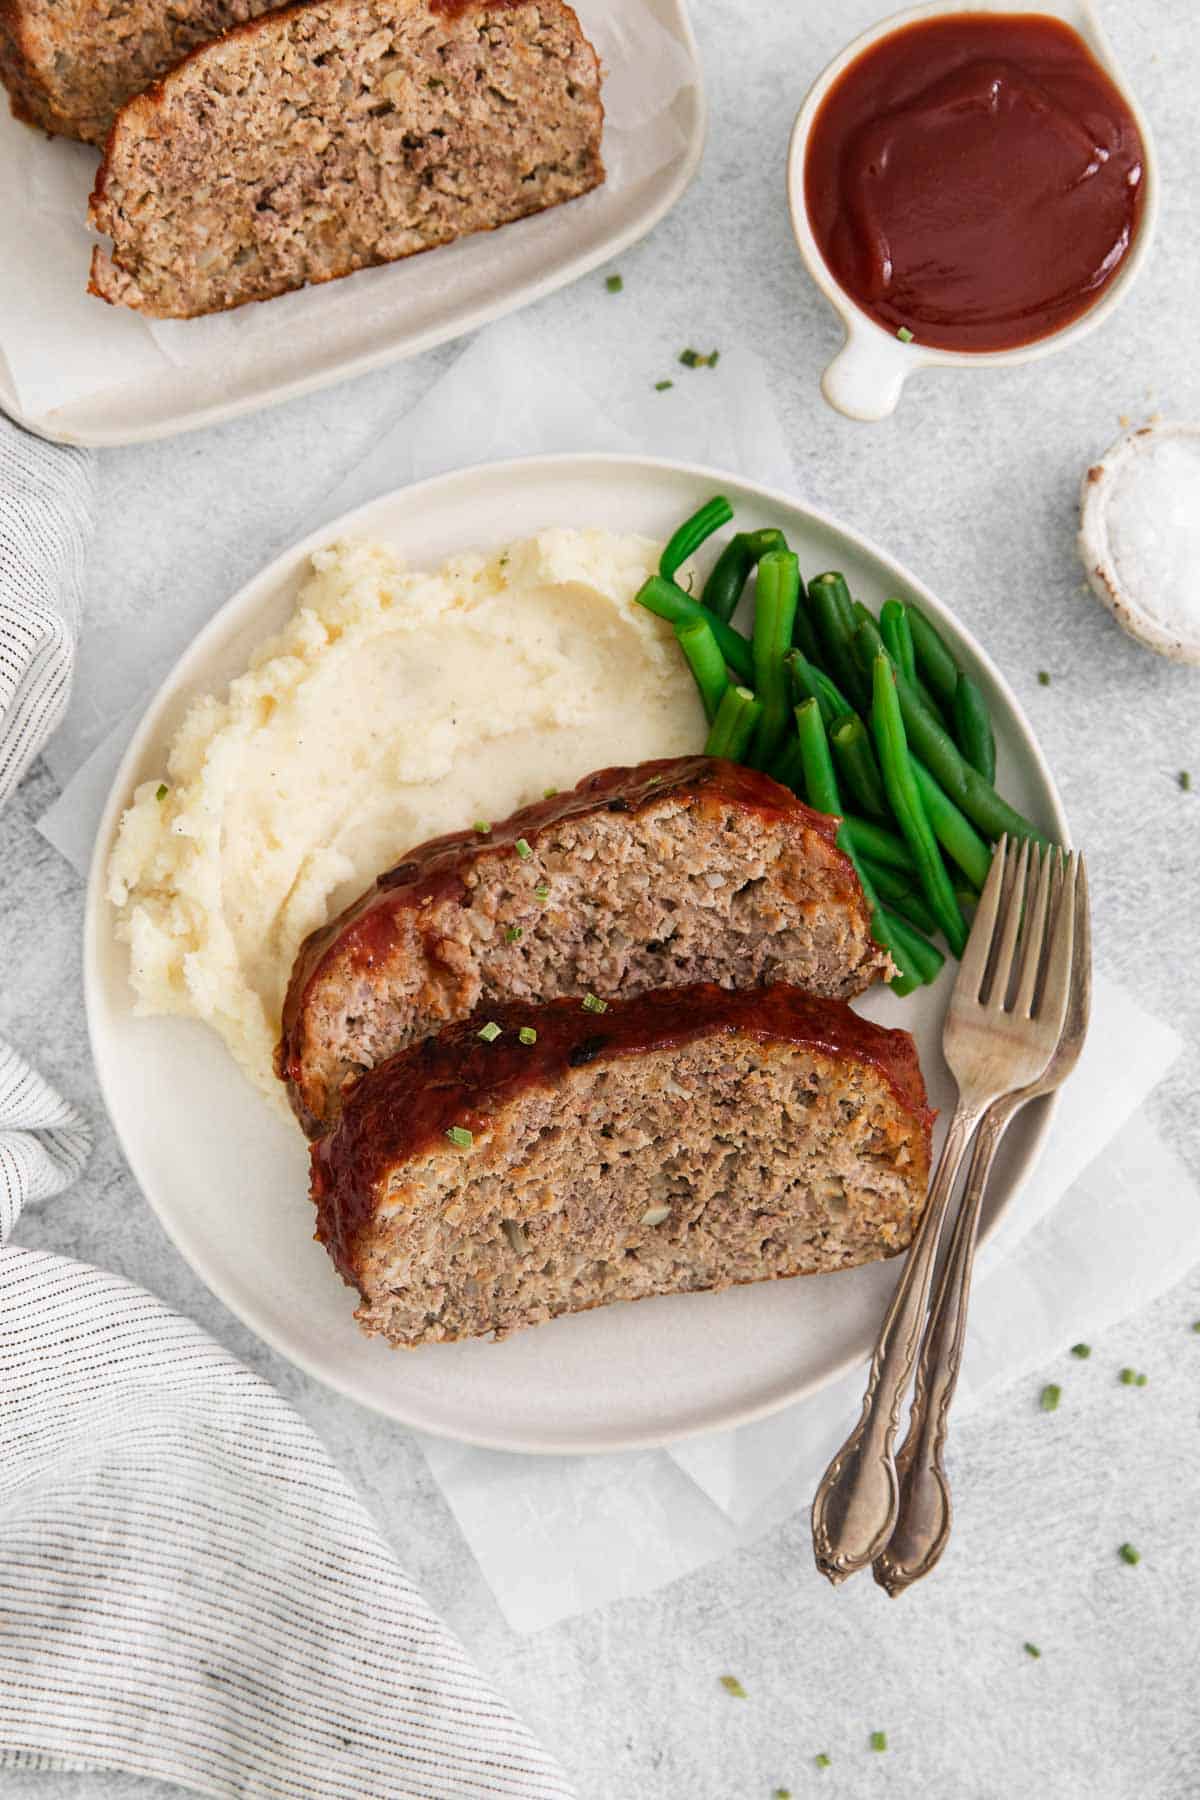 Gluten-free meatloaf arranged on a plate with mashed potatoes and green beans